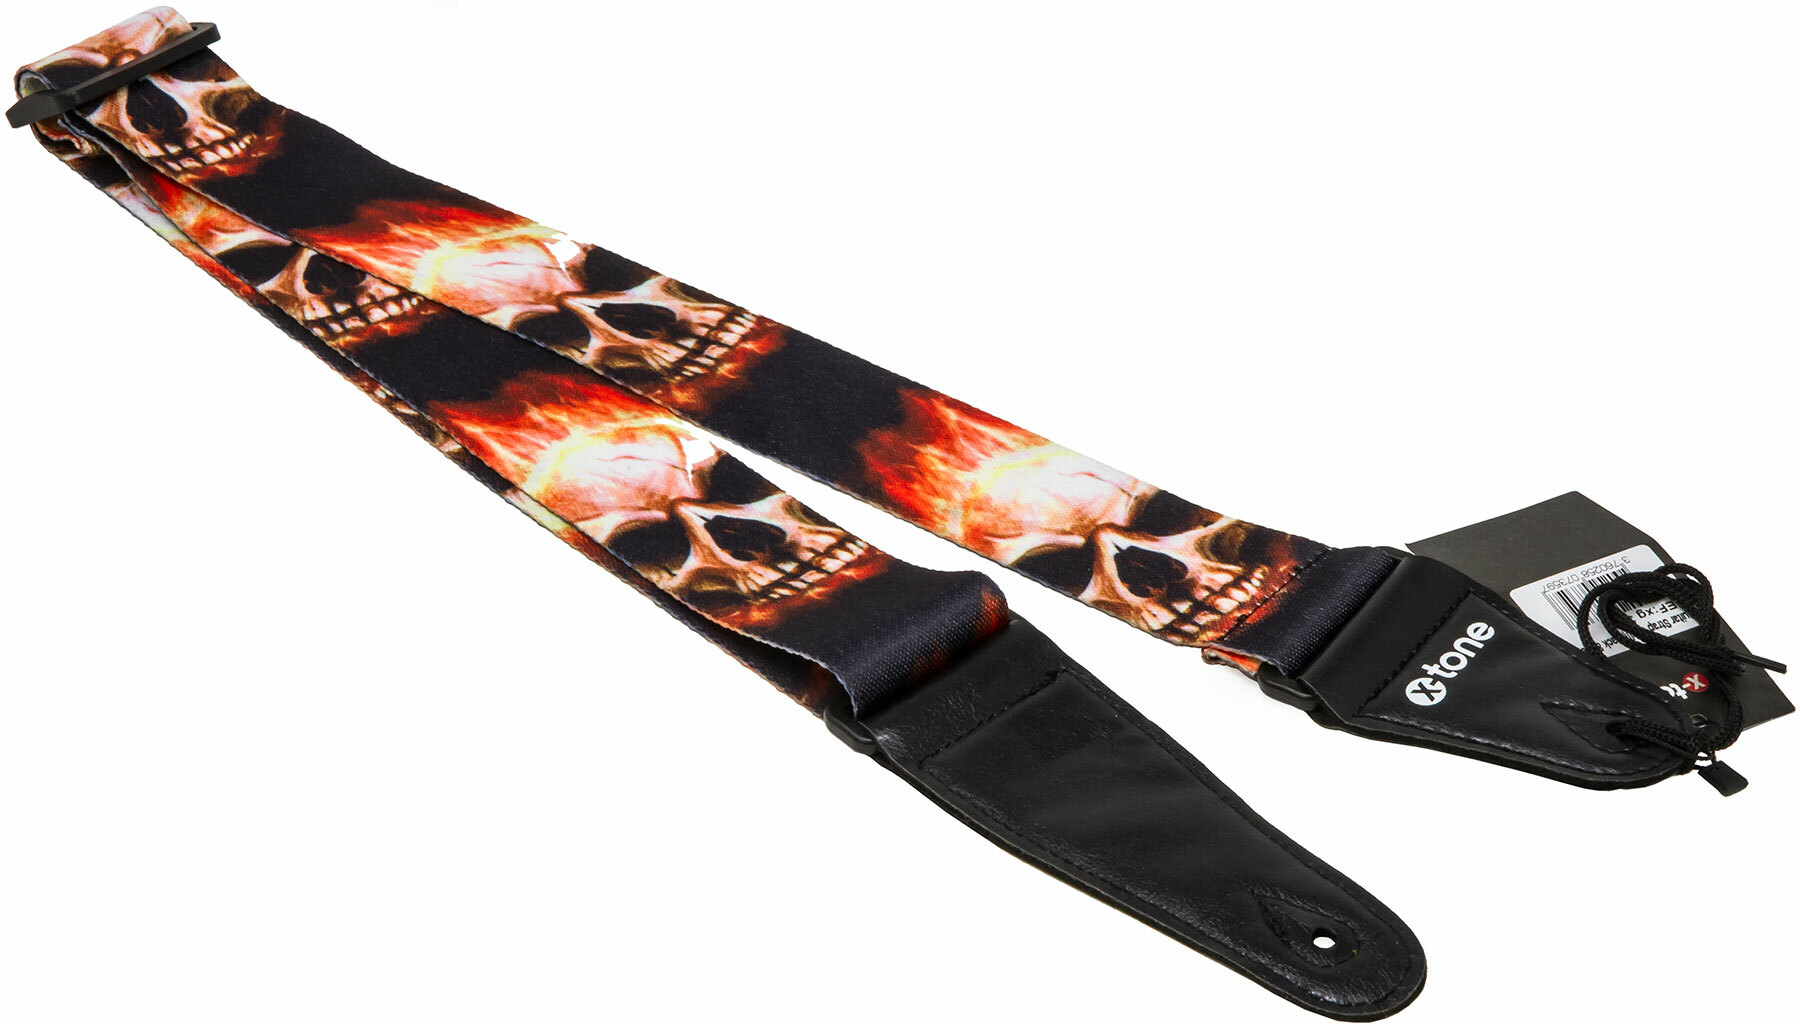 X-tone Xg 3101 Nylon Guitar Strap Skull With Flame Black & Red - Sangle Courroie - Main picture